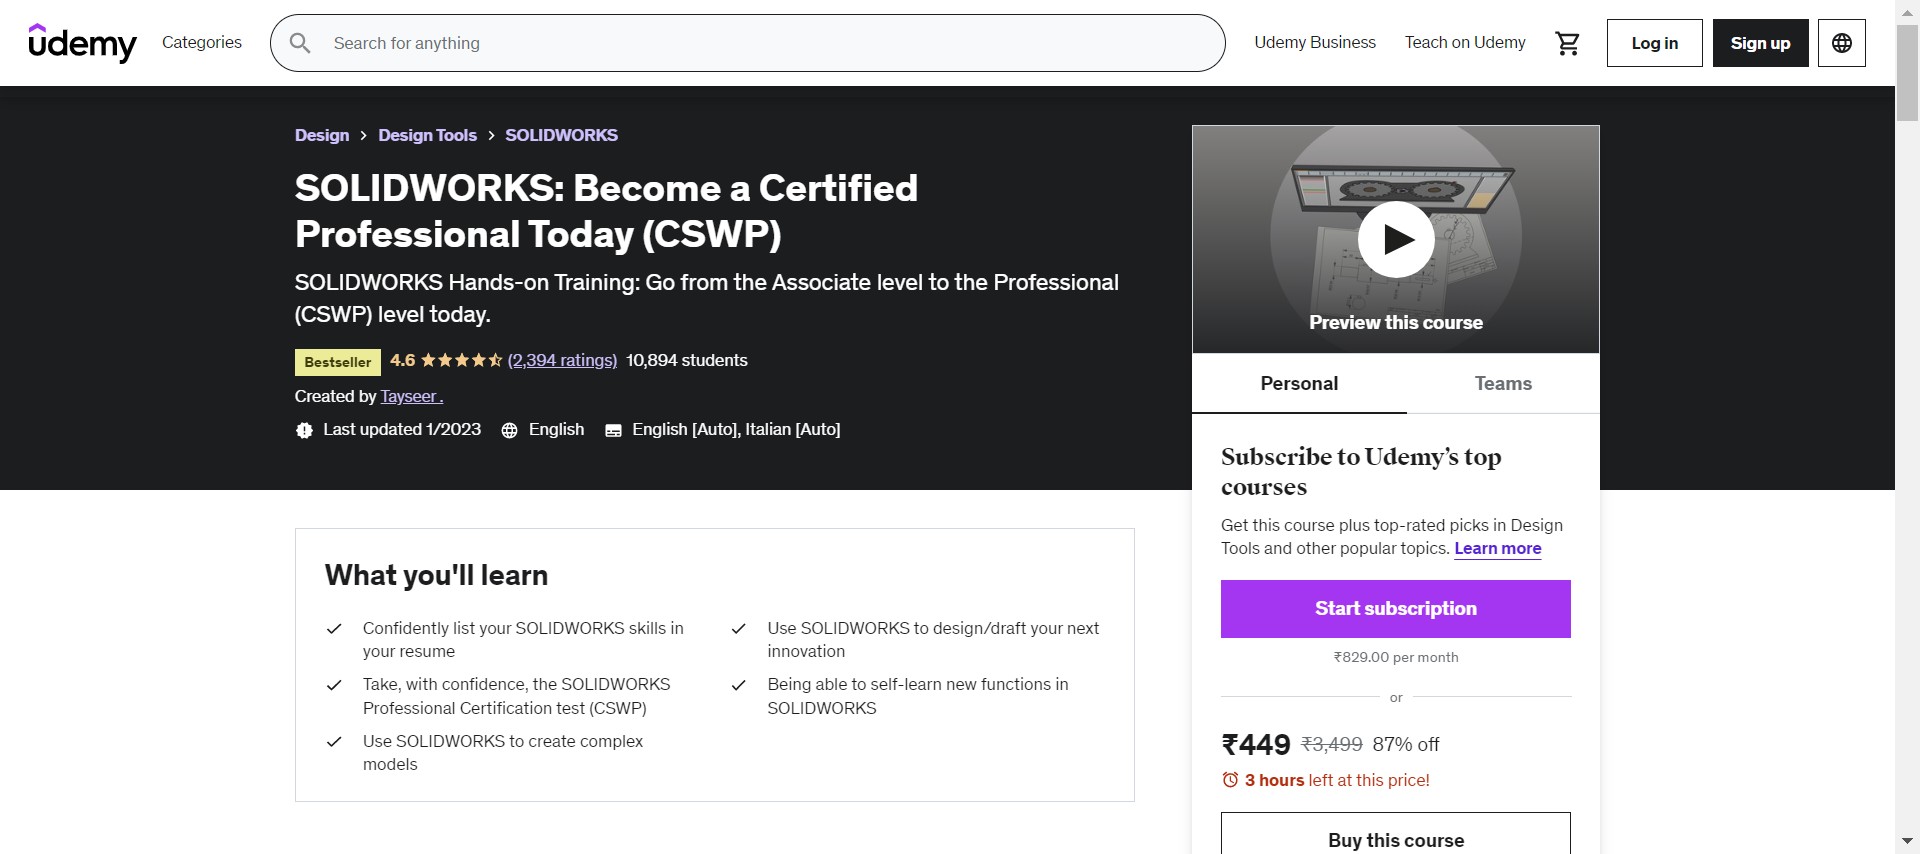 Become a Certified Professional Today (CSWP)